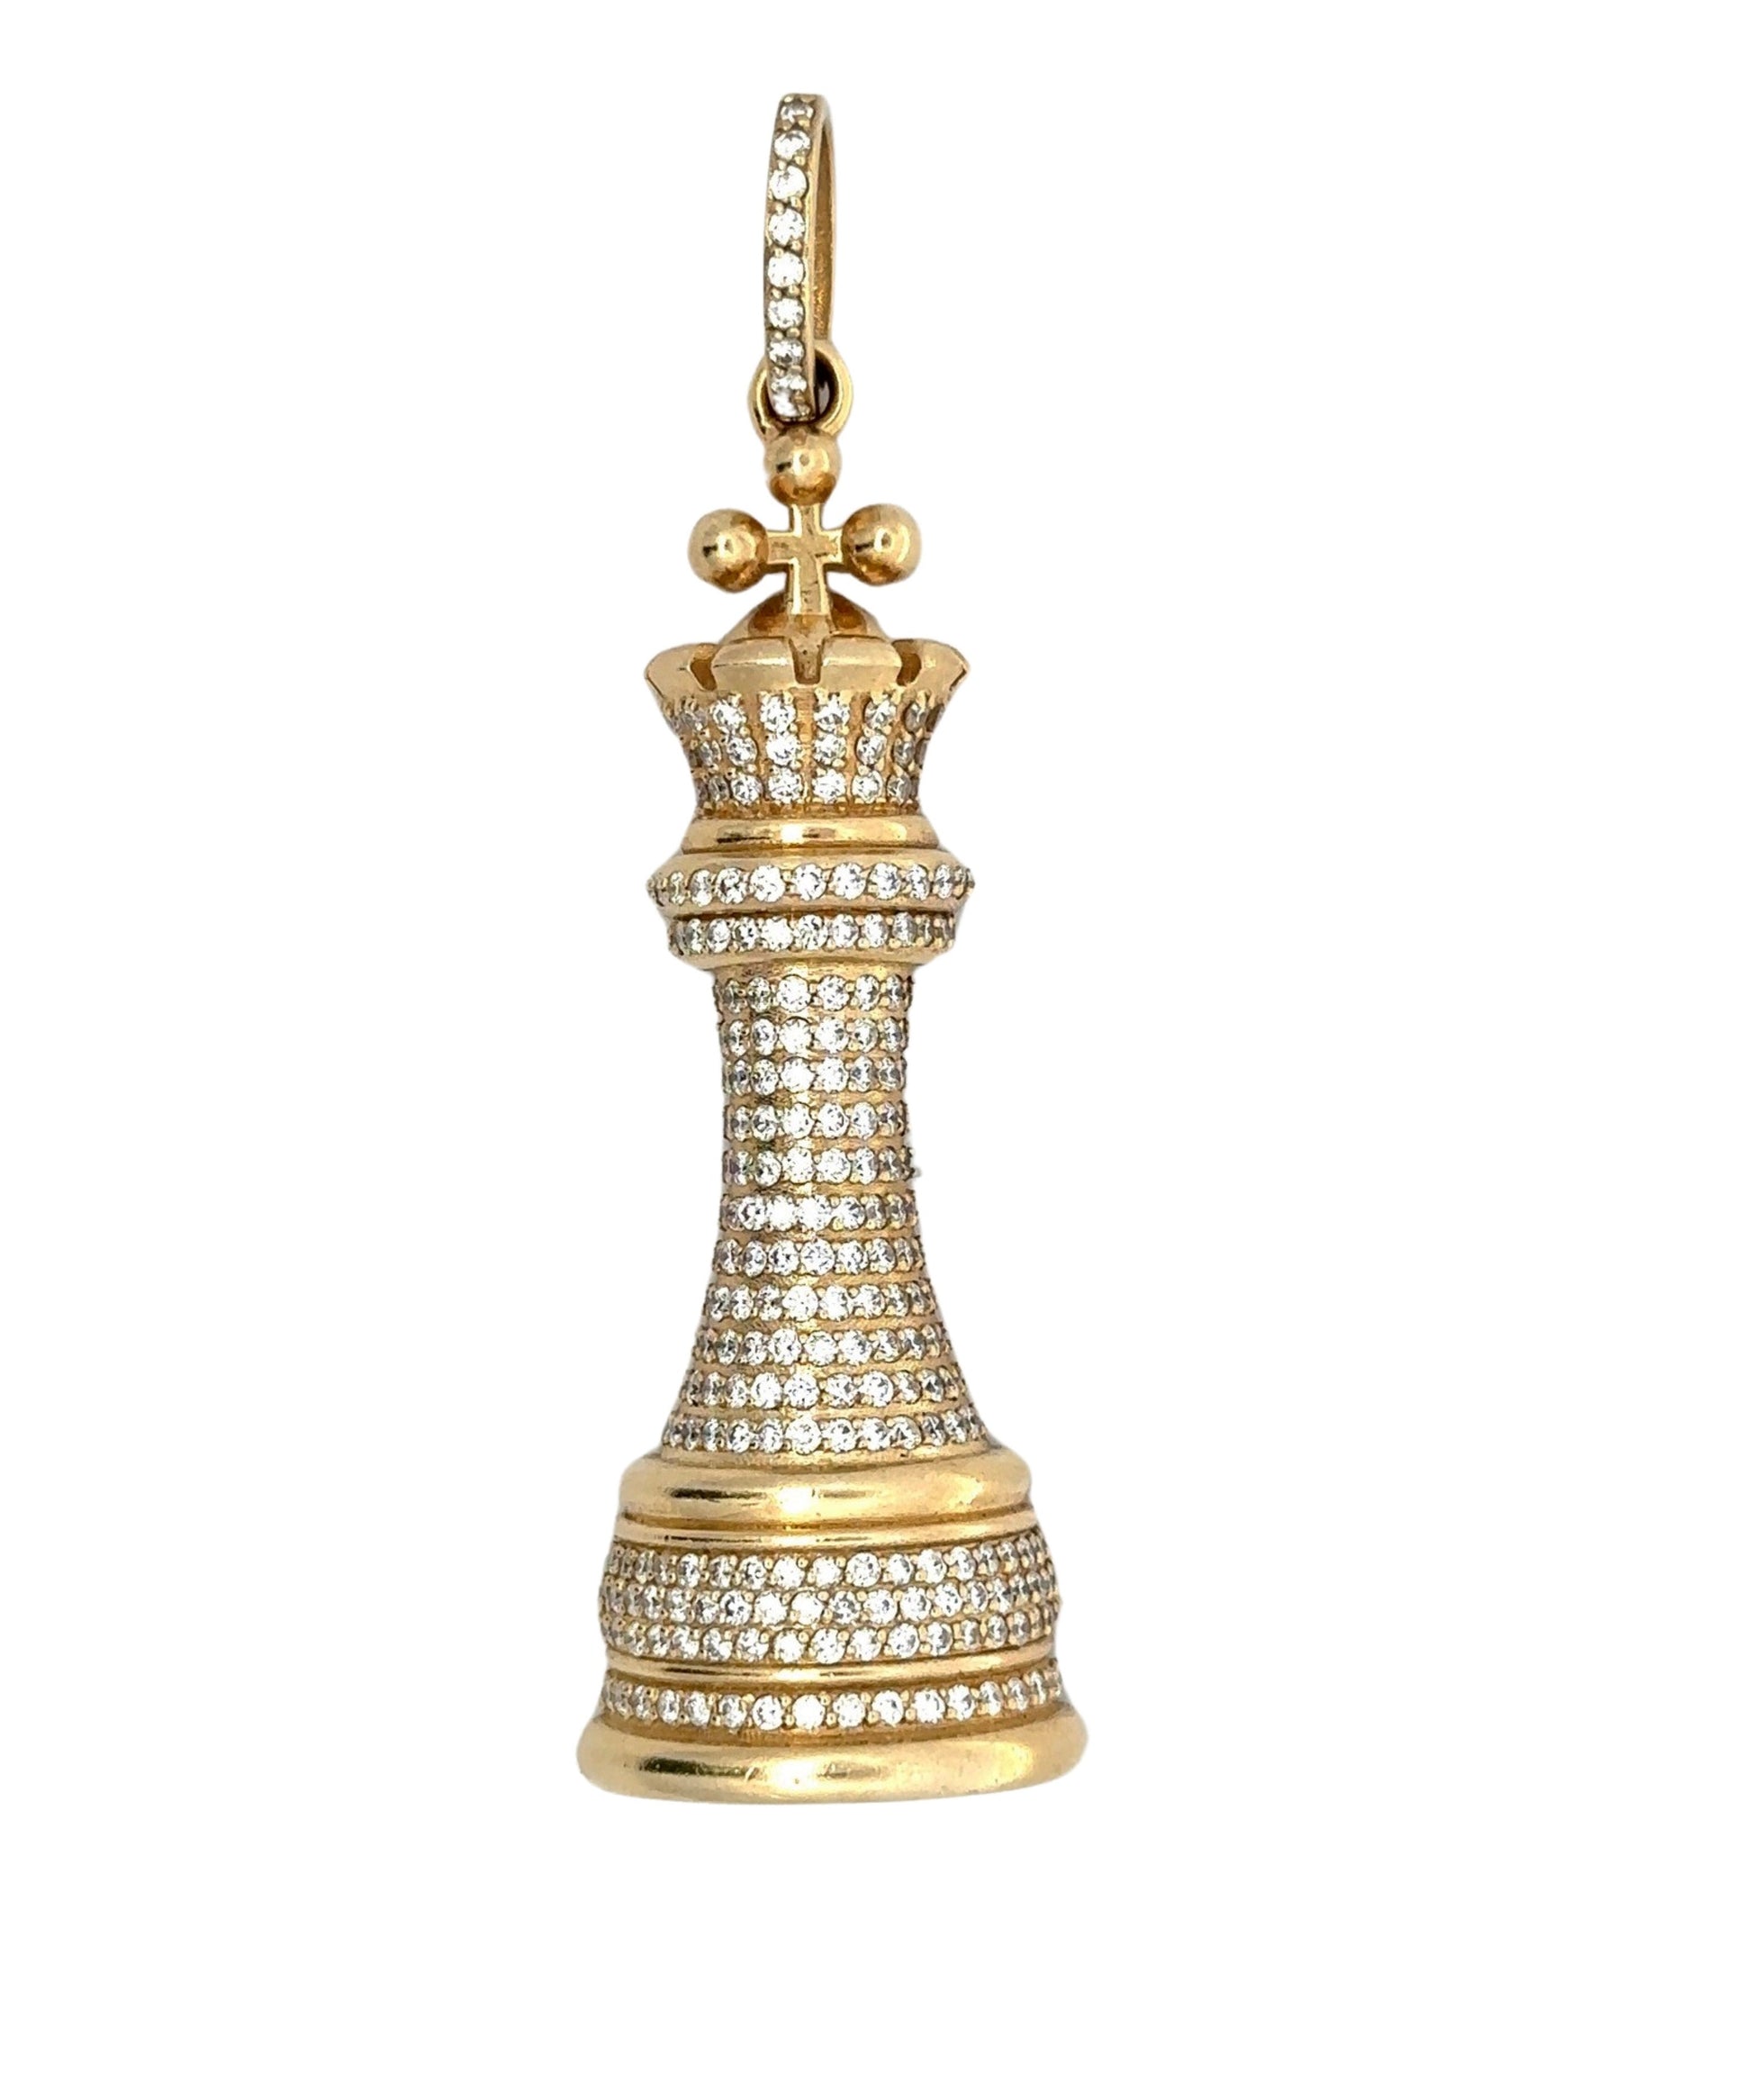 King chess piece pendant lying down face up